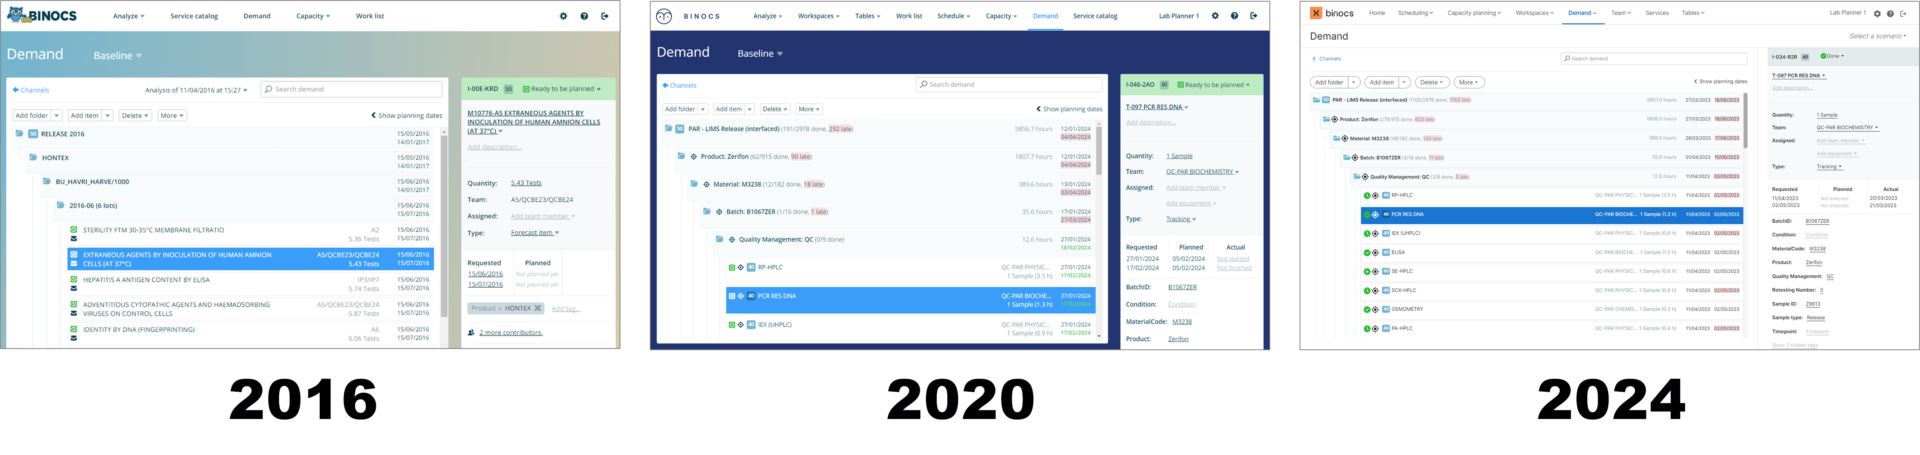 An overview of the evolution of the Binocs user interface from 2016, throught 2020, and into 2024: making key refinements and enhancements but keeping the familiar functionality